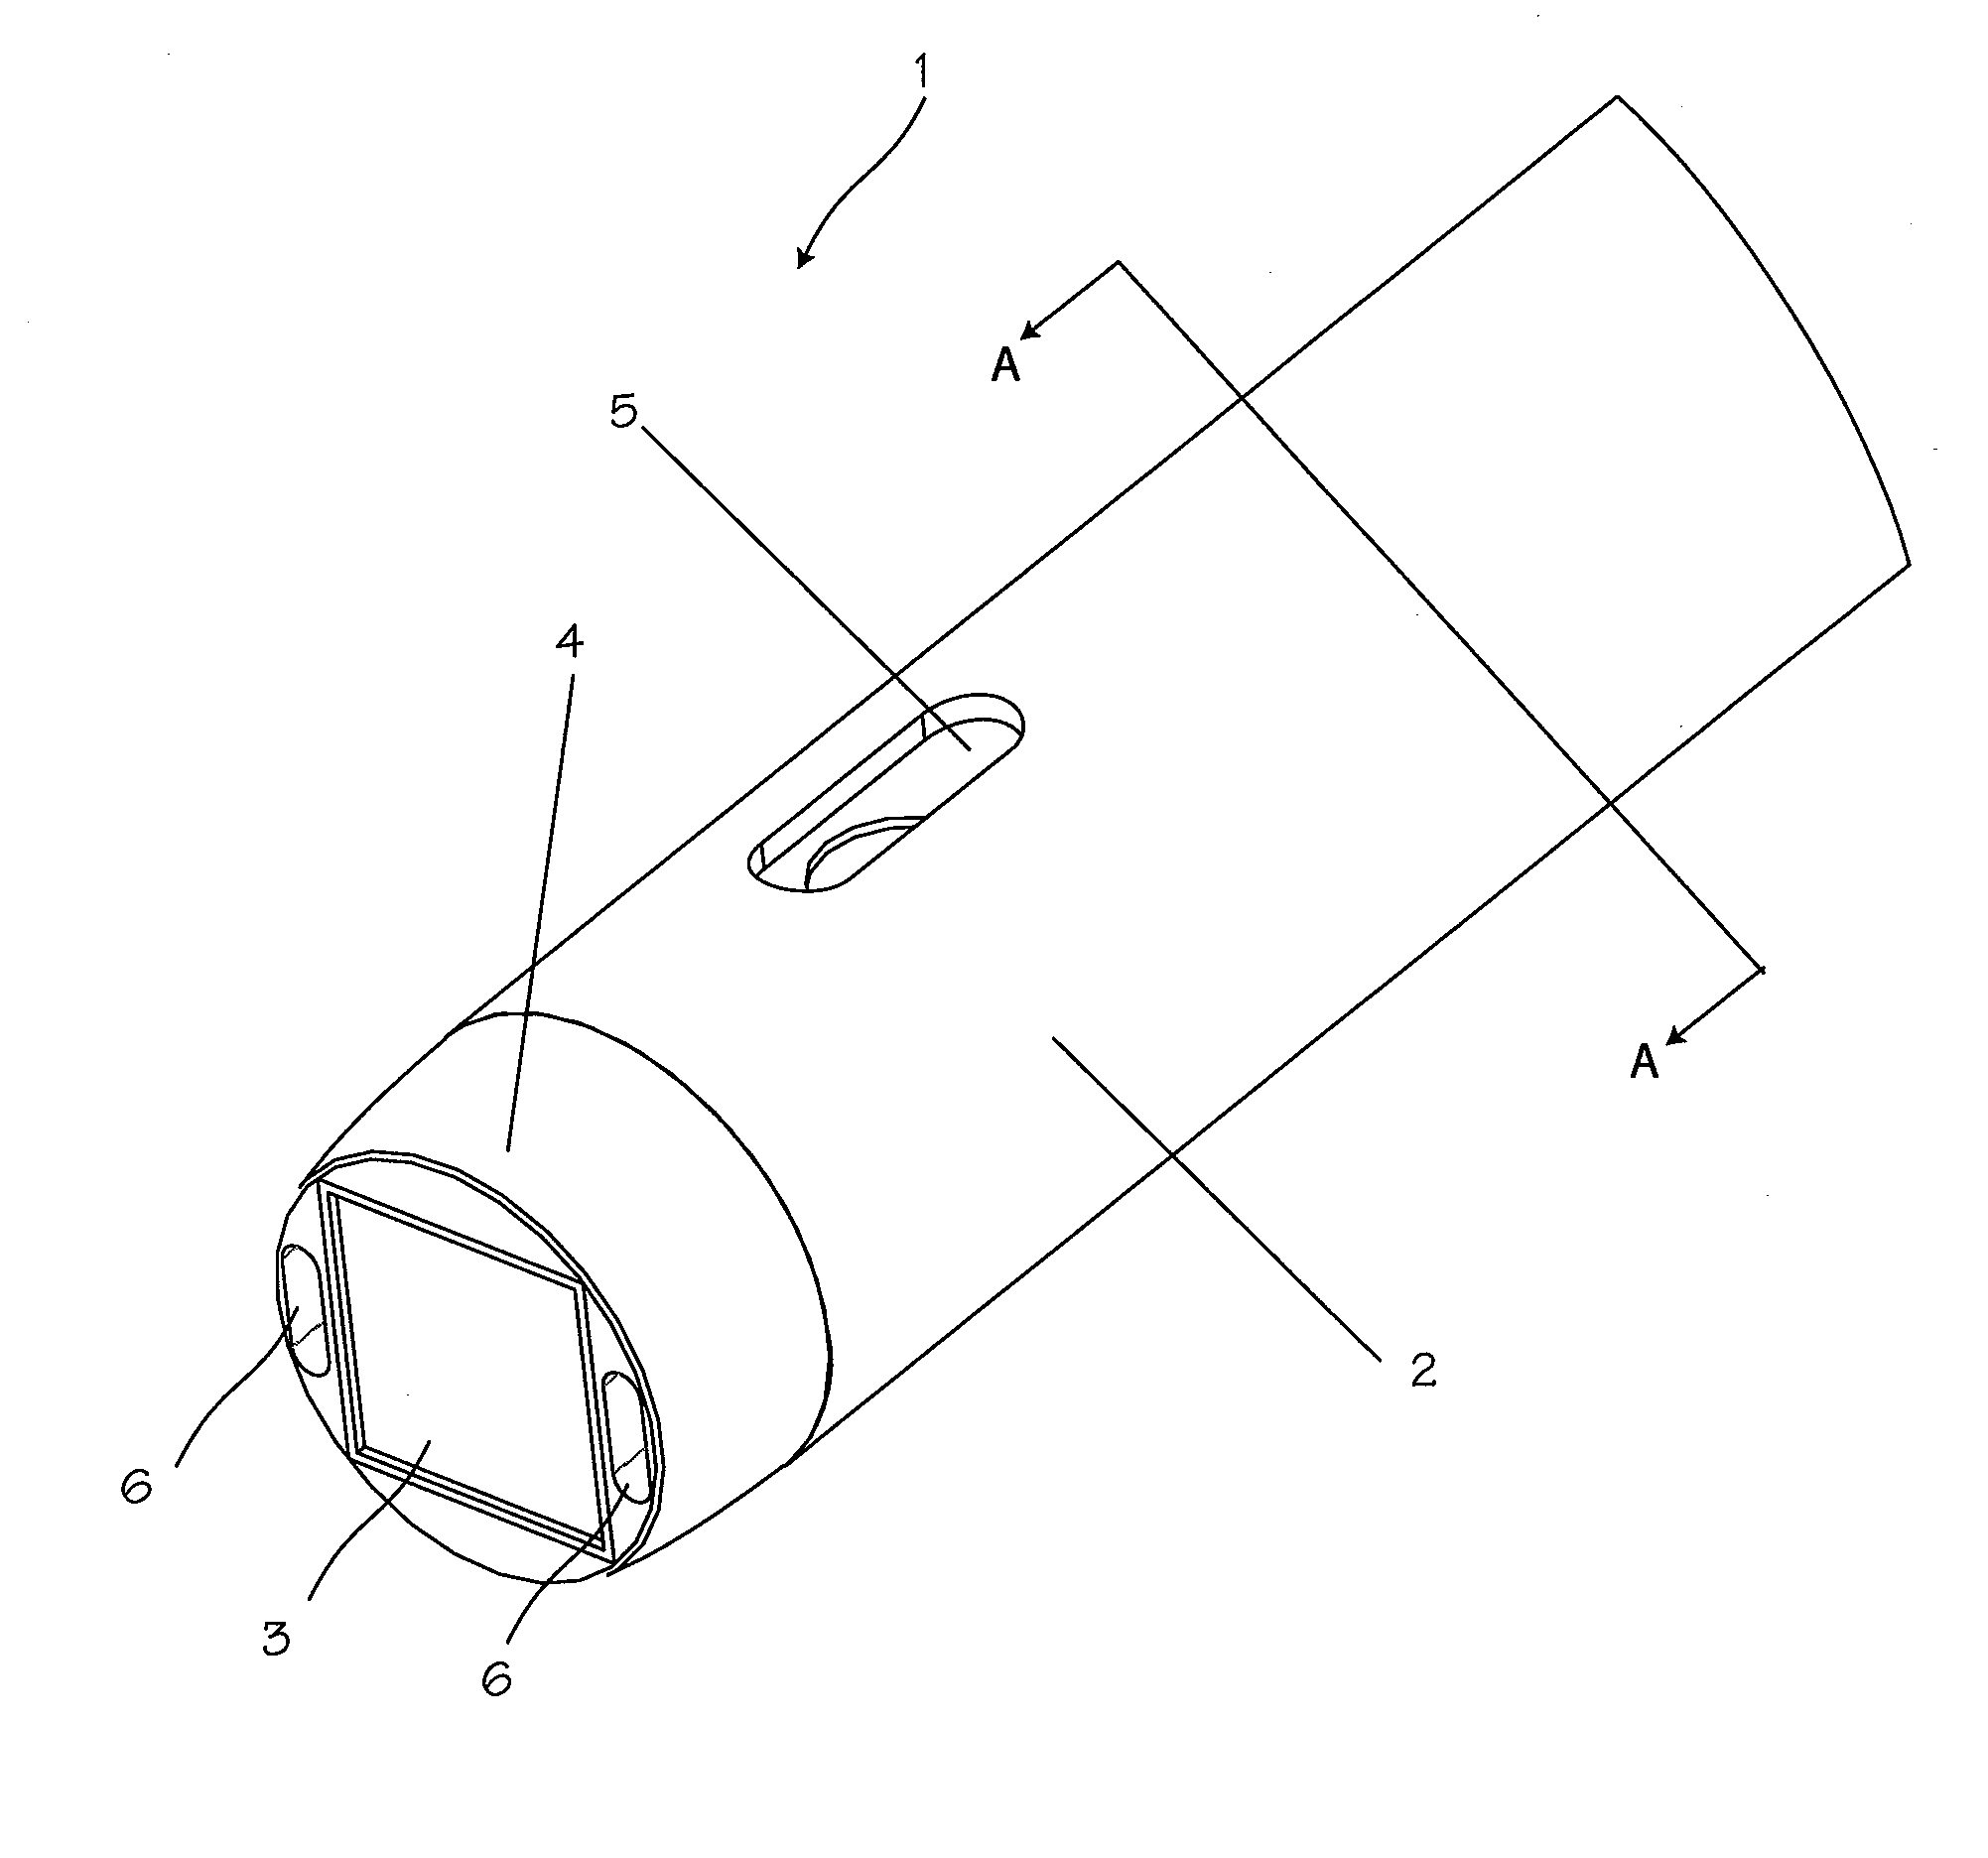 Optical Cap for Use With Arthroscopic System